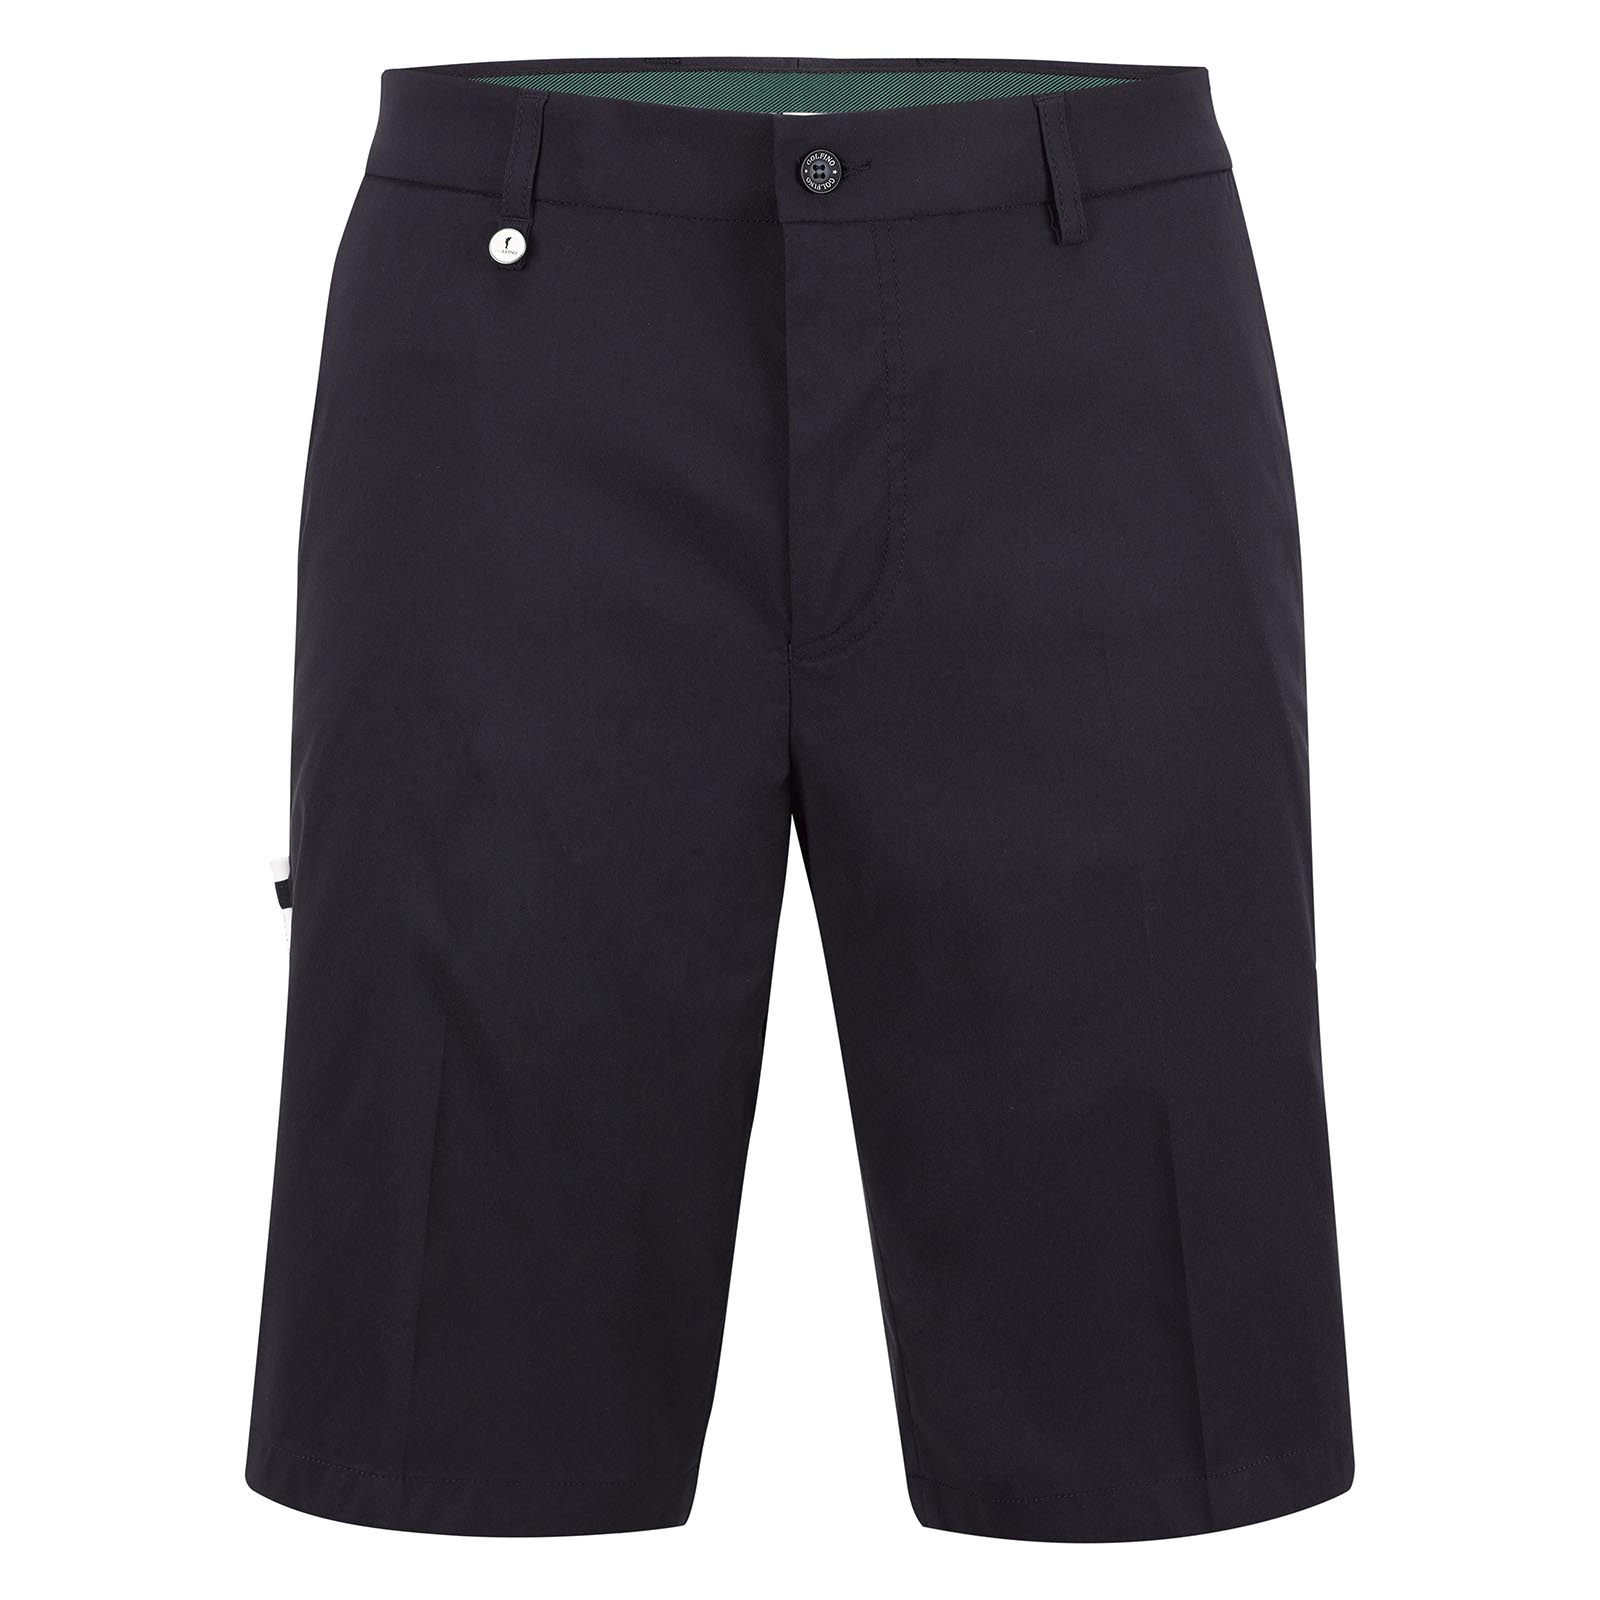 Men's techno stretch sun protection golf shorts in regular fit